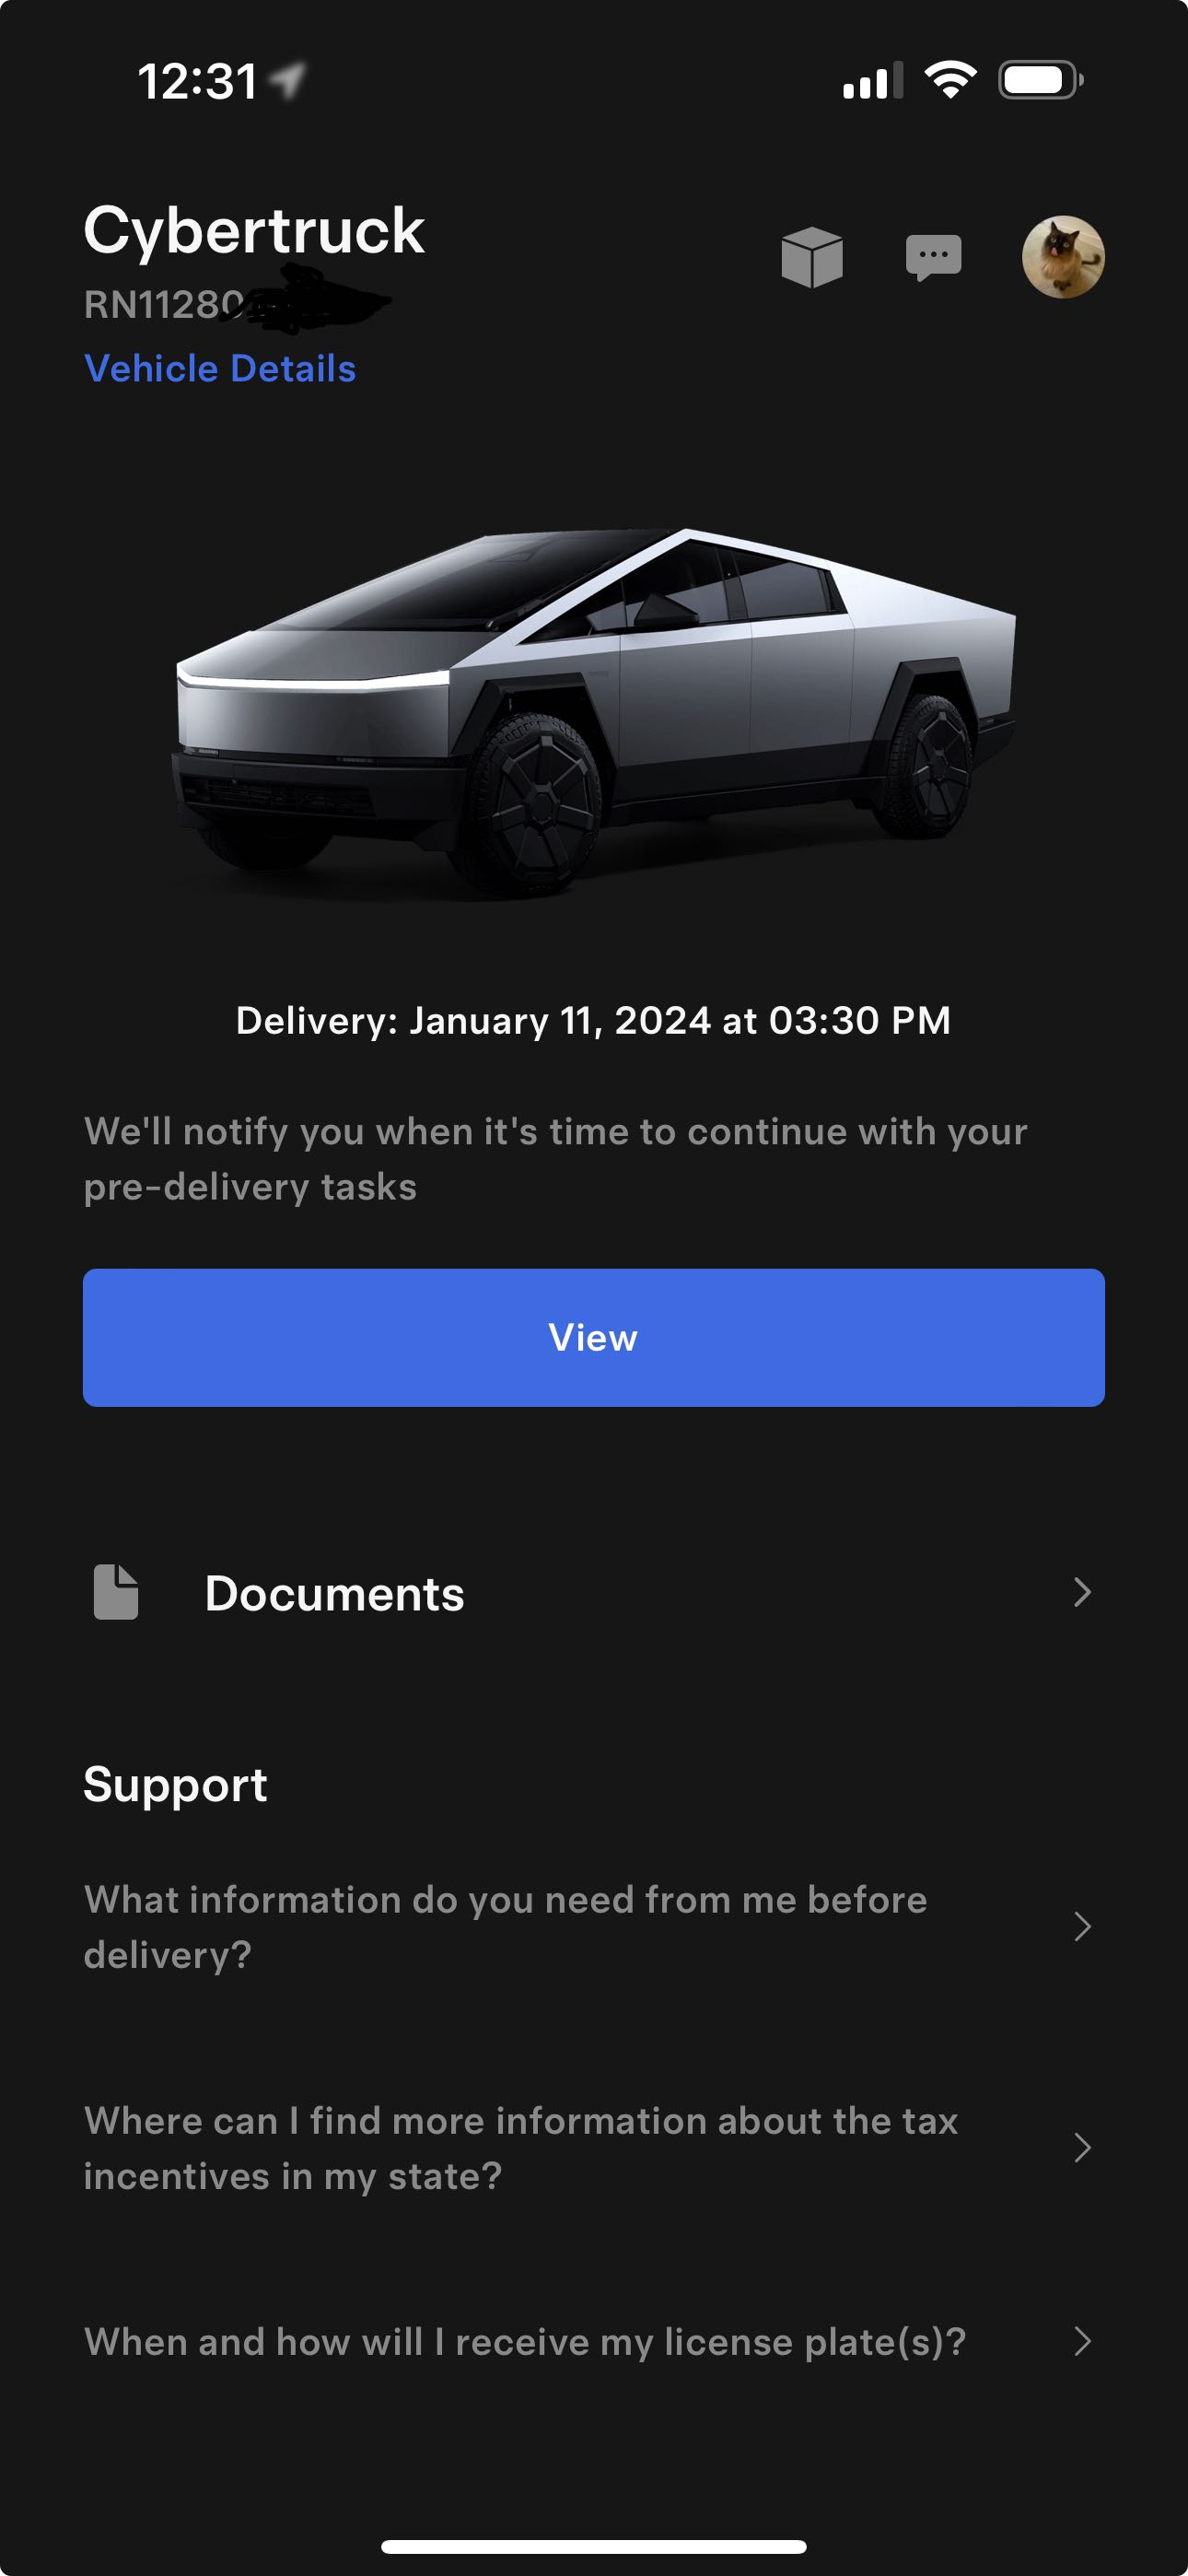 Tesla Cybertruck My Cybertruck is Delivered Today January 11!! (non-employee) 👍 First Impressions + Photos 📸 Image_20240111123328